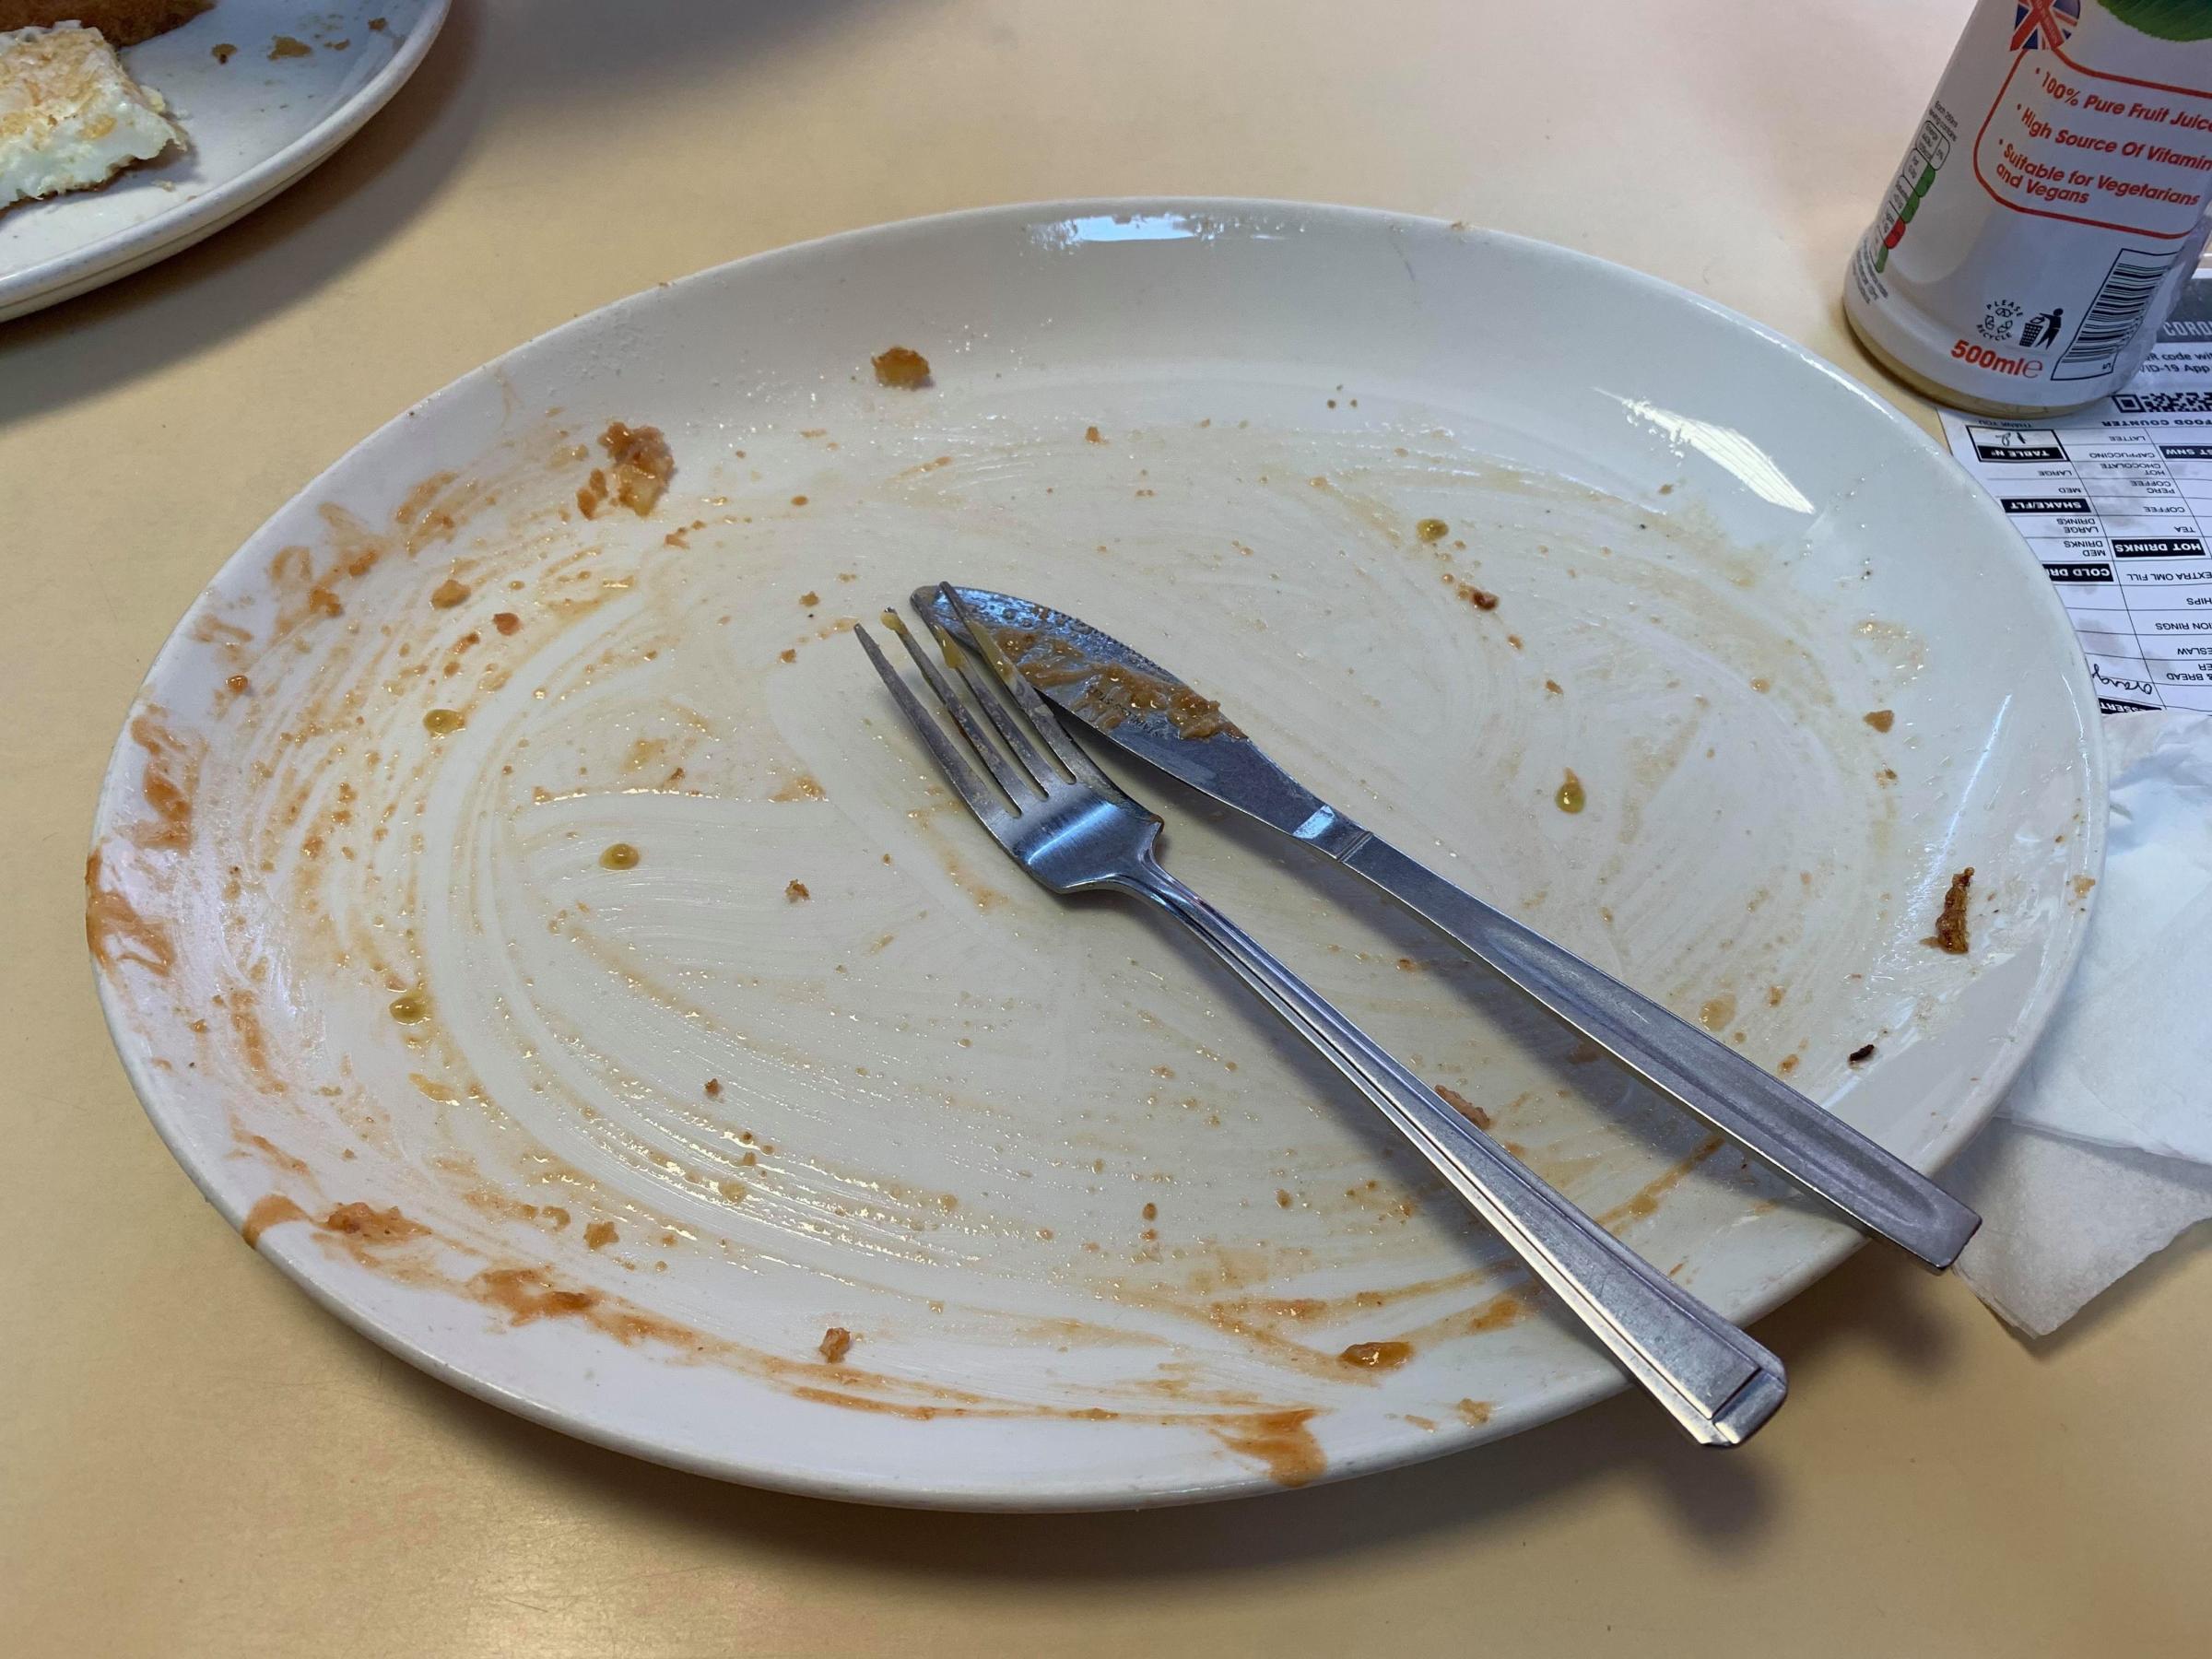 An empty plate following a delicious meal